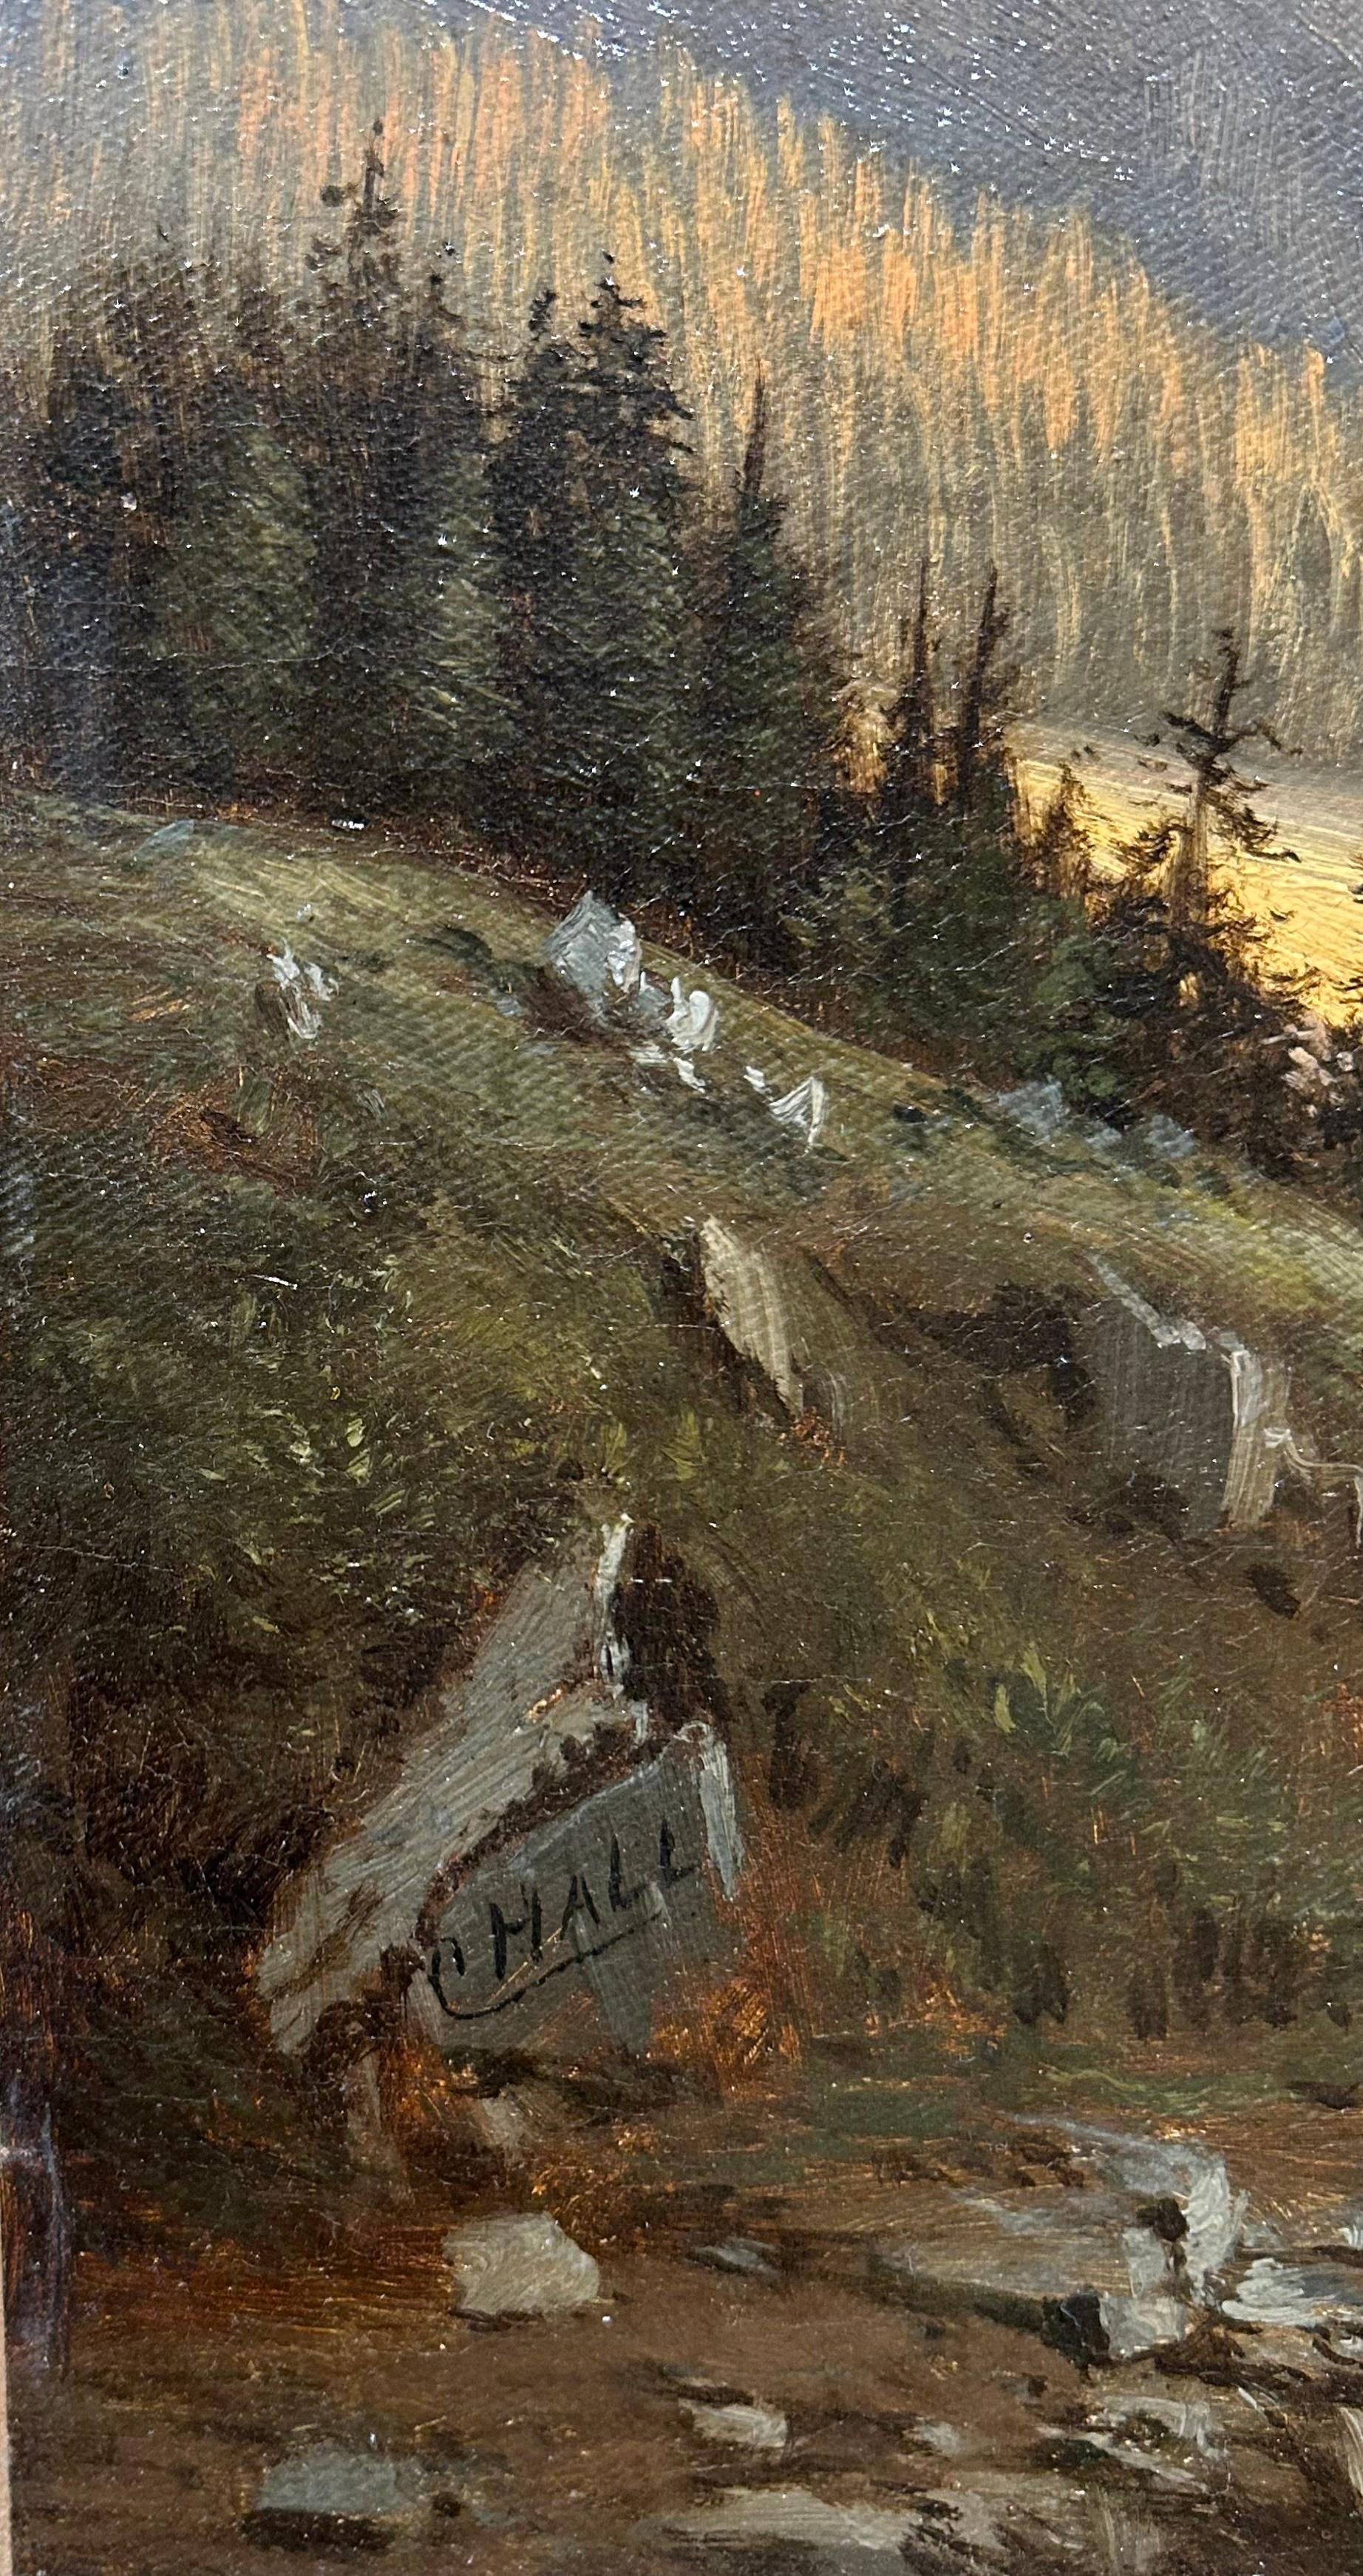 Cyrenius Hall was an artist who painted Western landscapes in a luminous style. He first went to Portland, Oregon in 1853 and 1854 over the Oregon Trail. From there he executed views of Mount Hood and Mount Rainier. Conventionally making his way